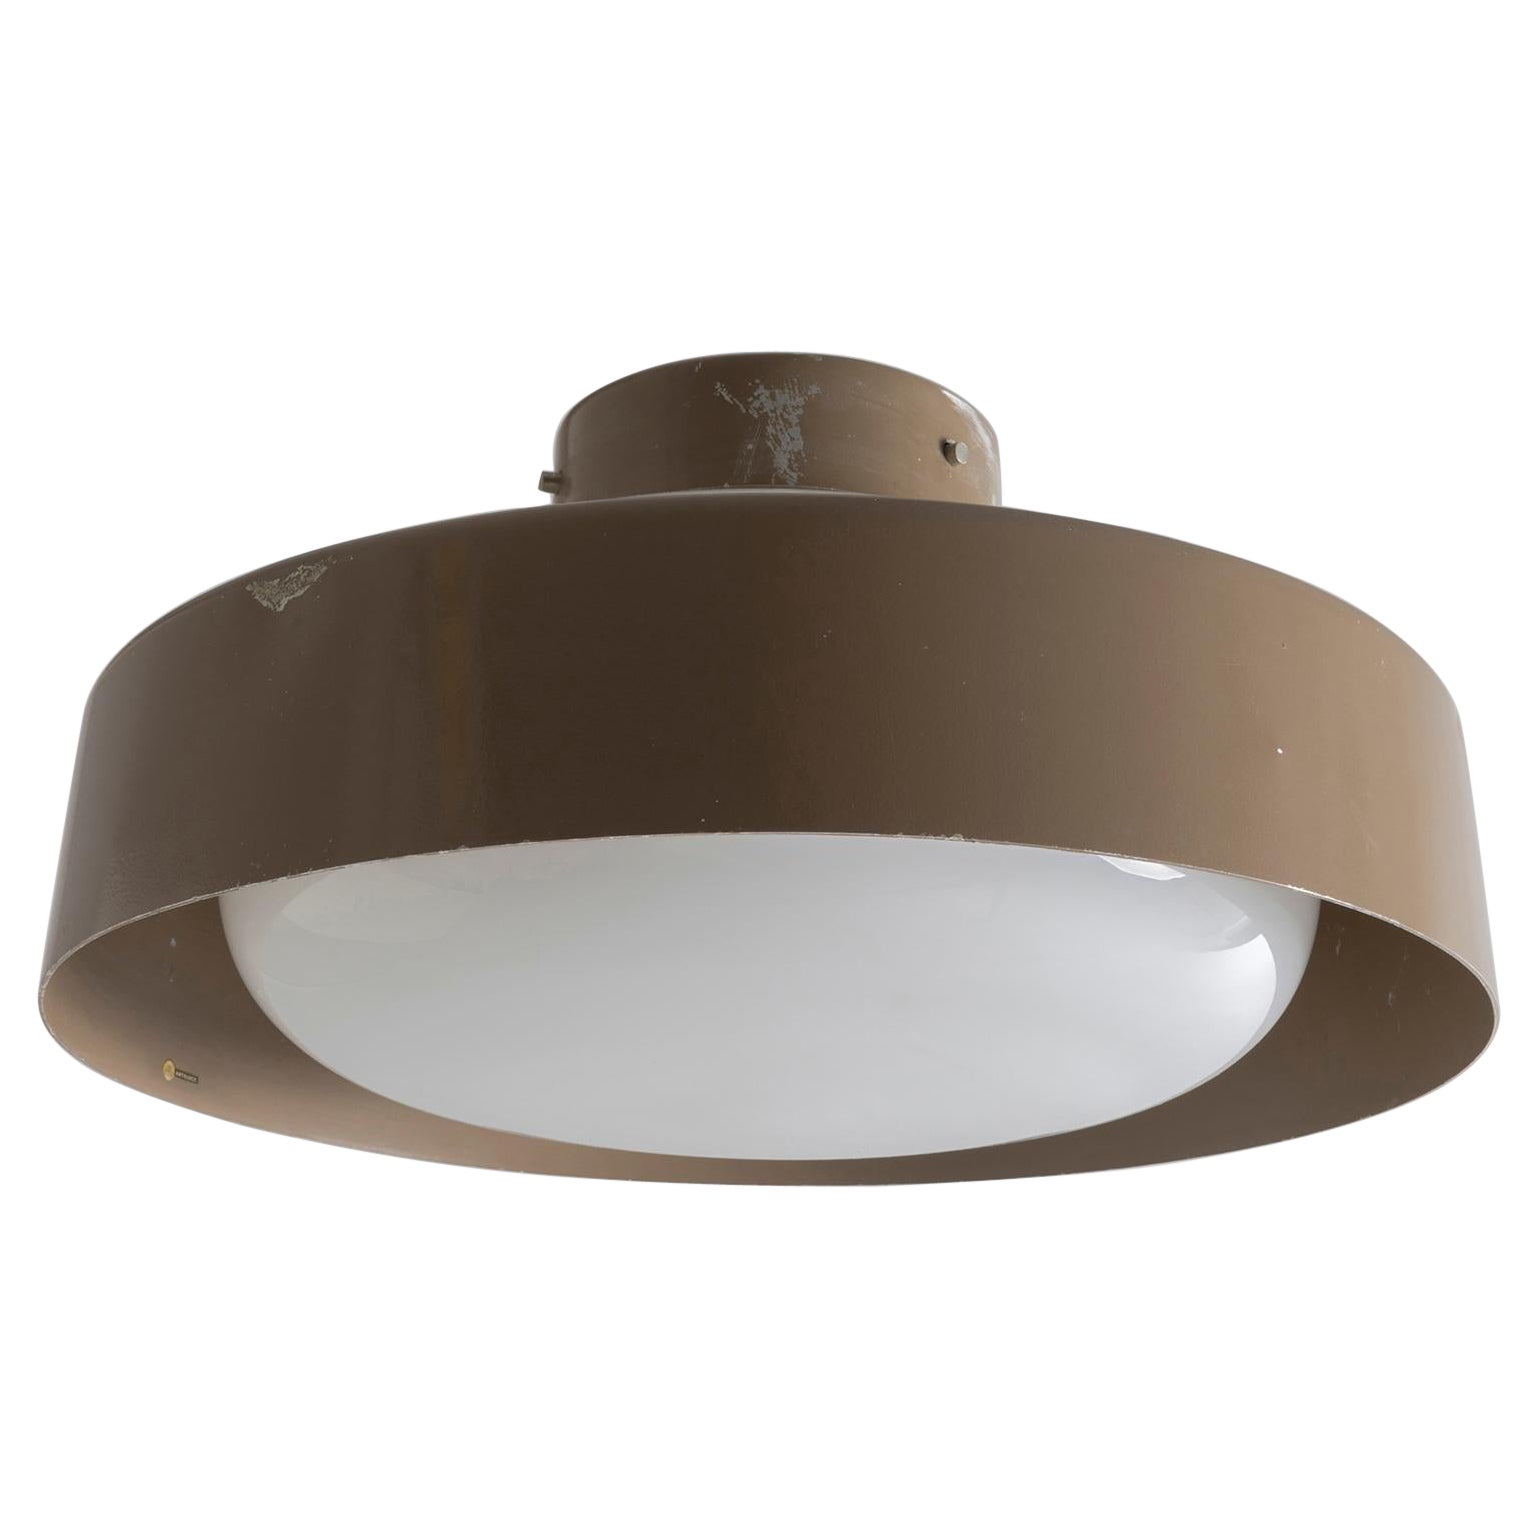 Ceiling lamp mod 3053 by Gino Sarfatti for Arteluce